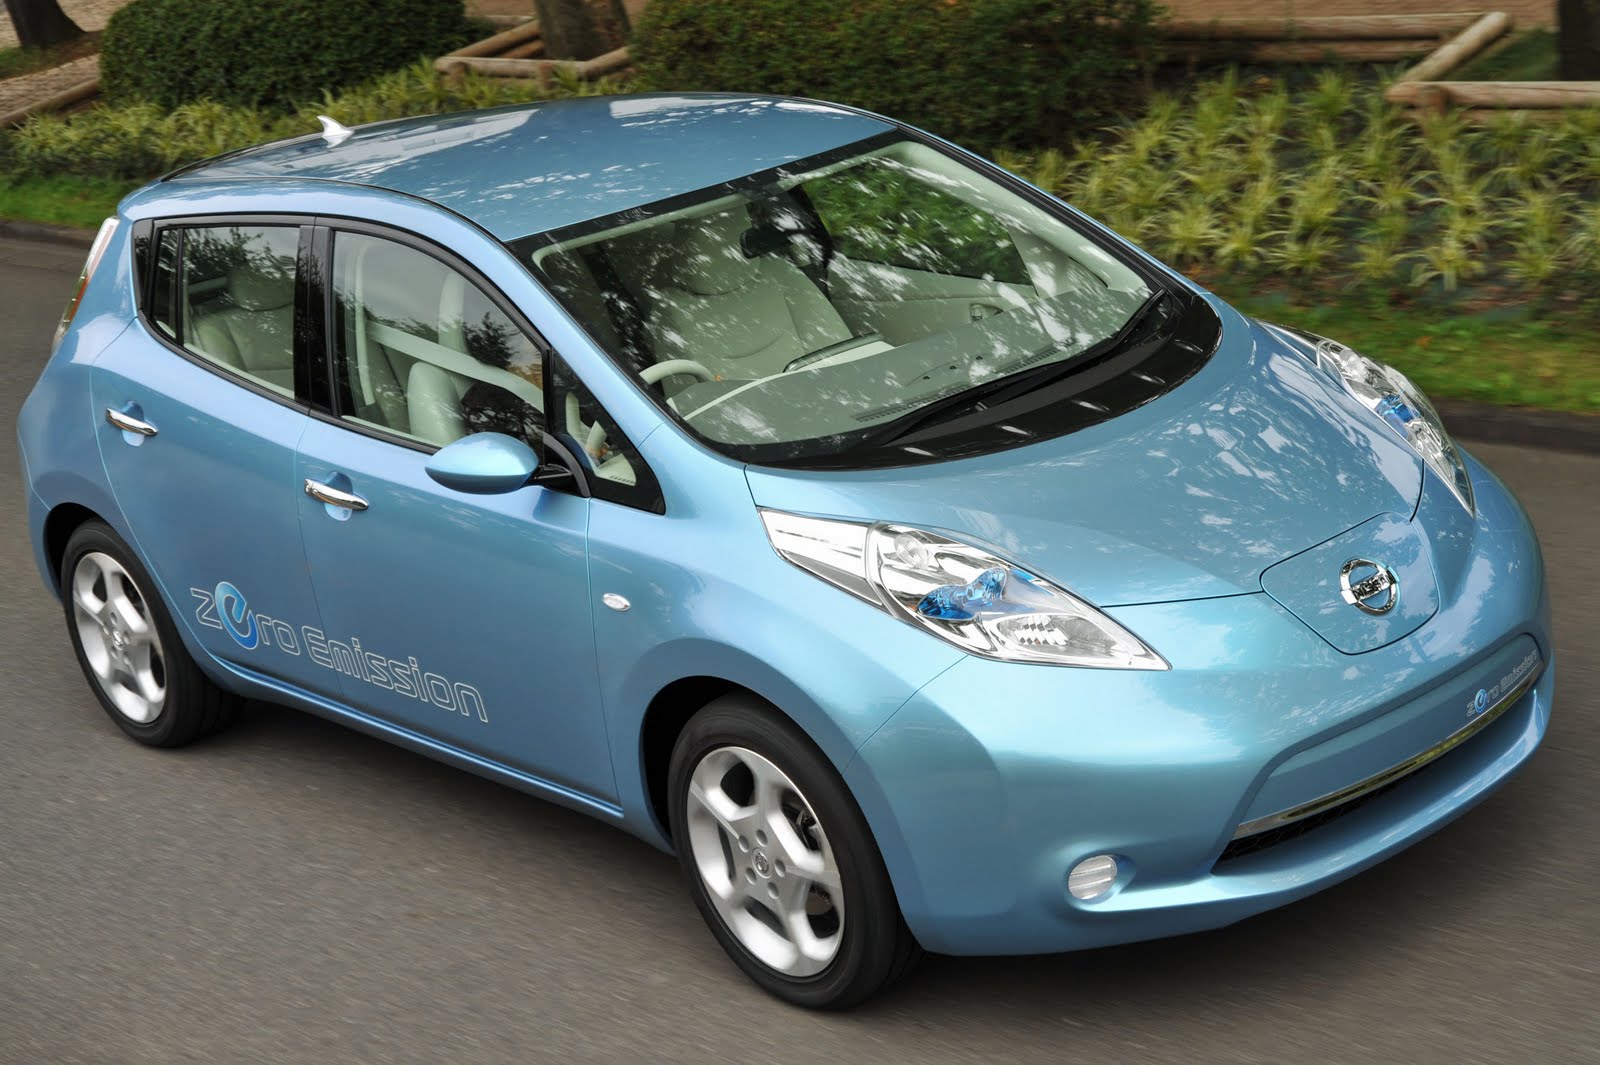 migliore-auto-nissan-leaf-orders-begin-april-20-price-25-280-with